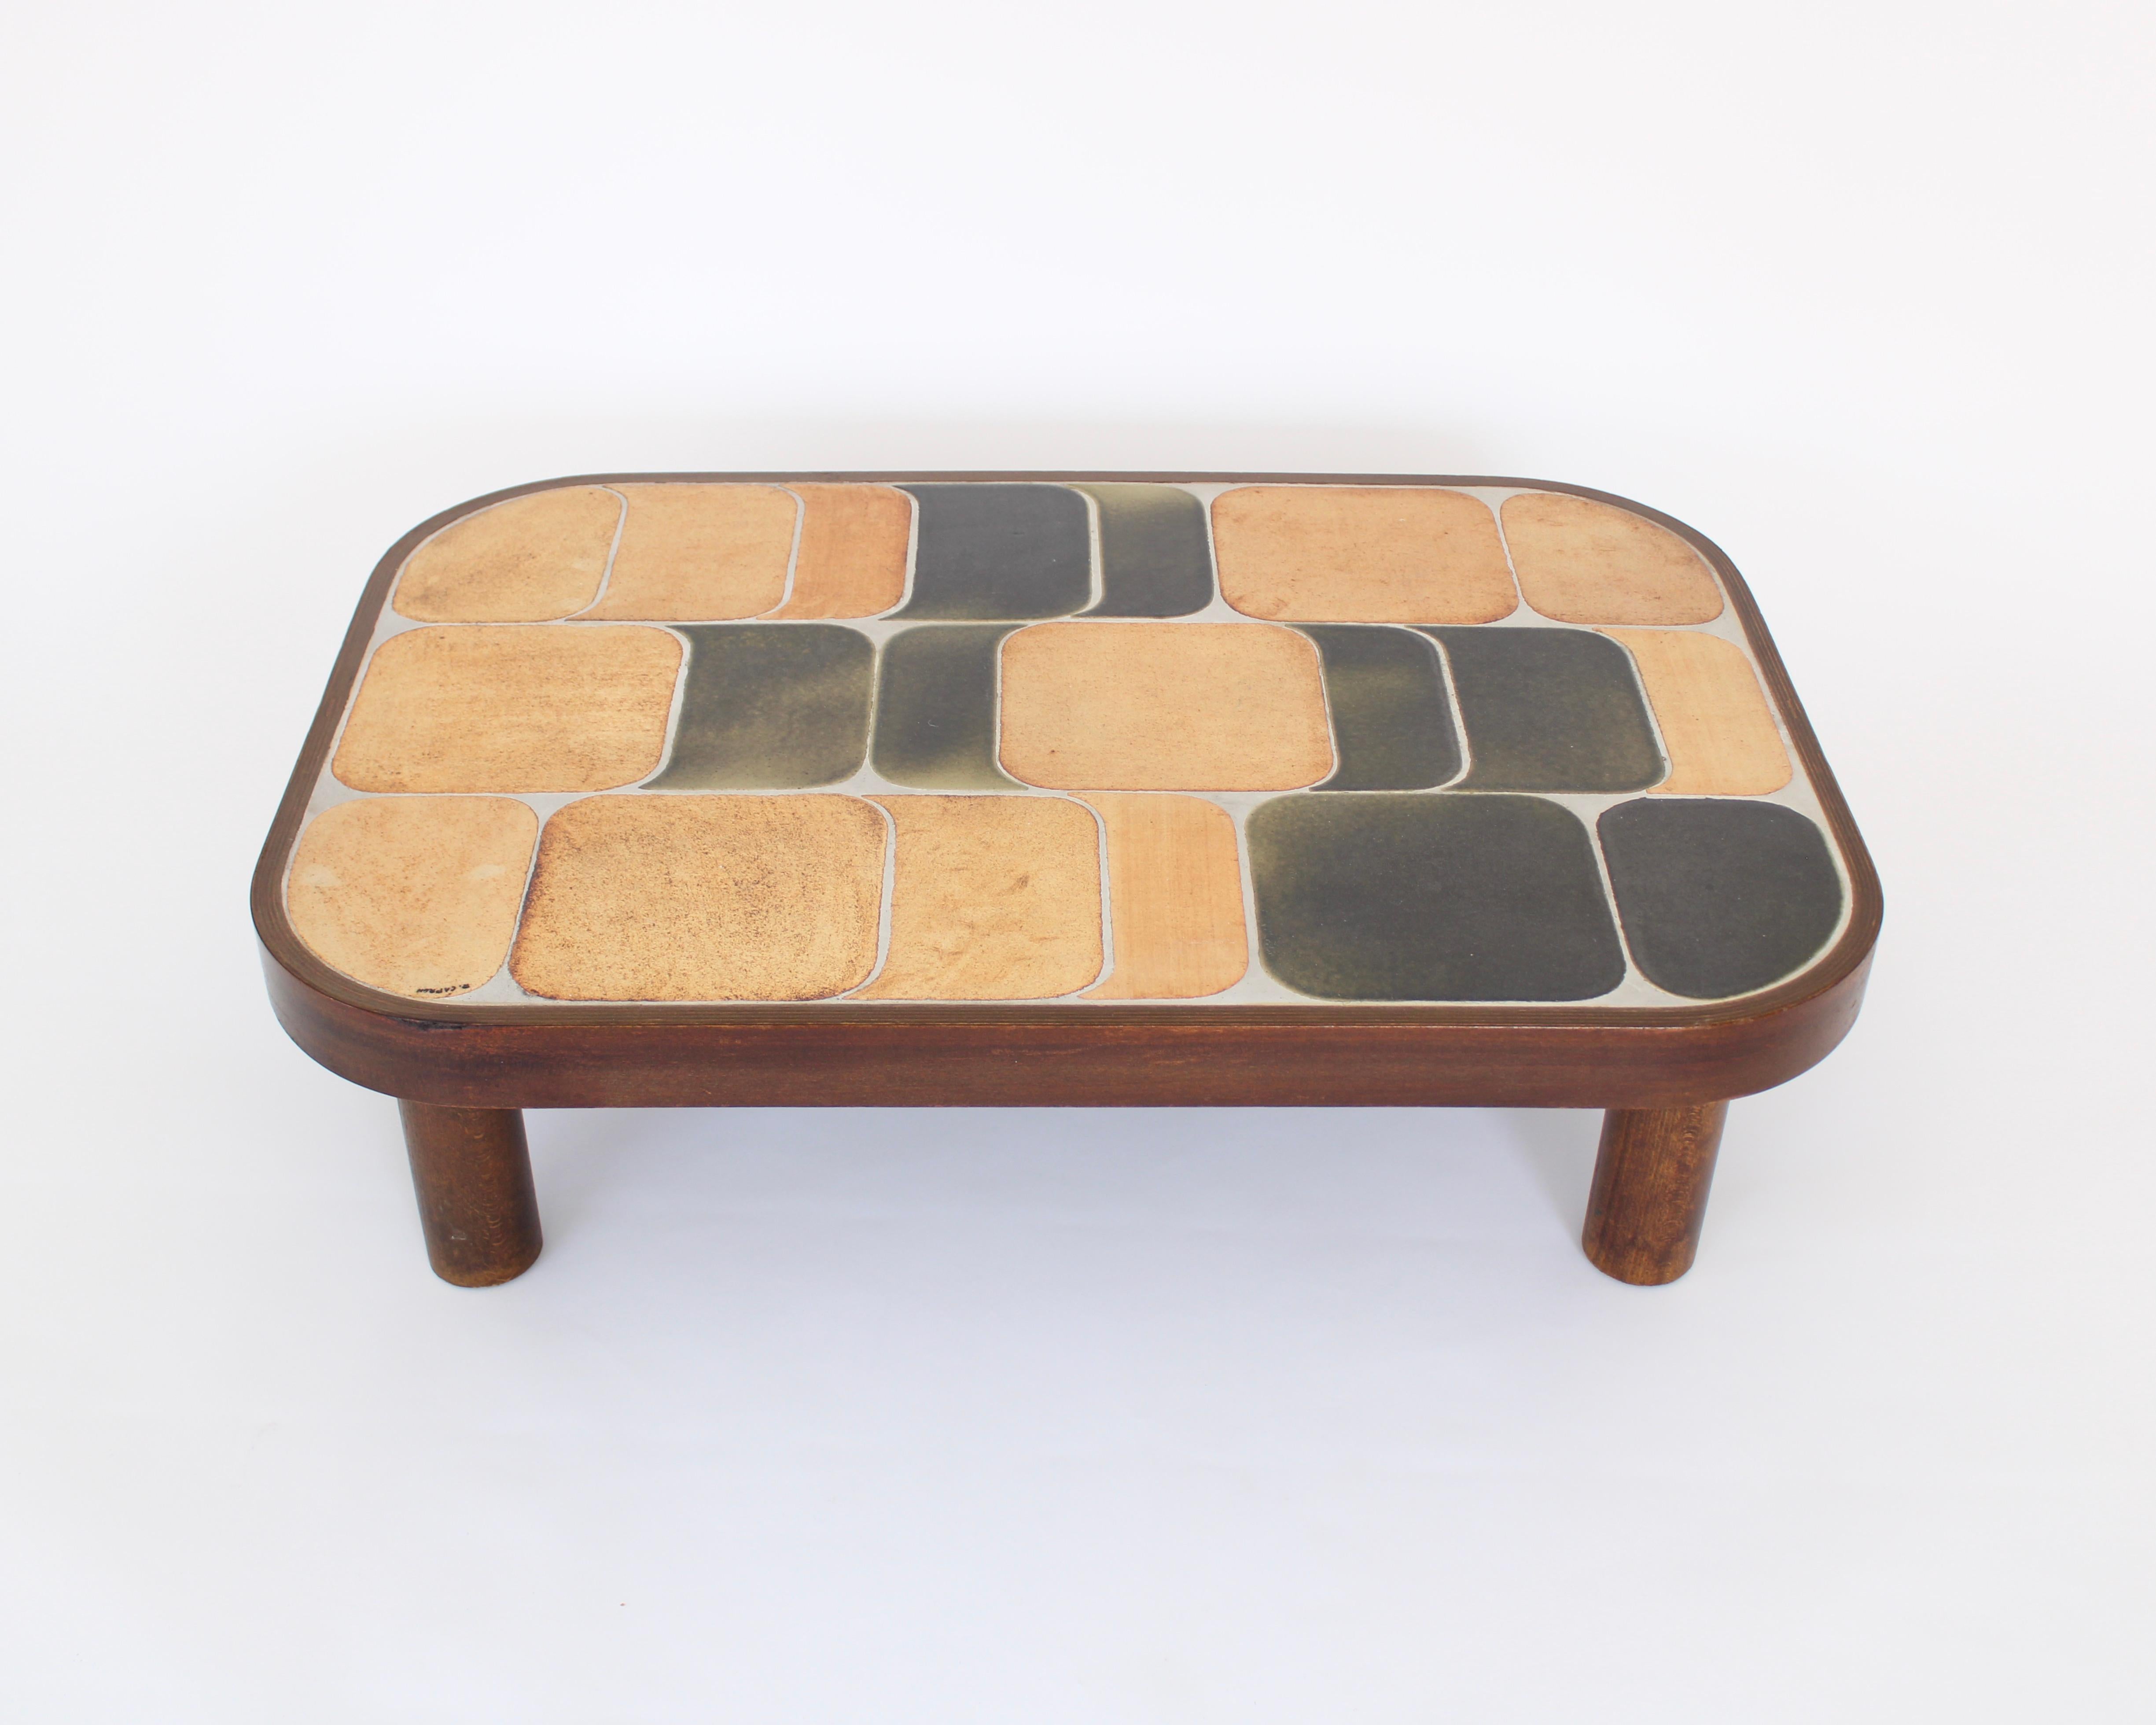 Roger Capron Sho-Gun or Shogun model coffee table with ceramic tile top with beige brown enameled tiles on mahogany base and feet. Signed R Capron.
The colors vary from table to table as a result of the temperature of the firing in the kiln. No